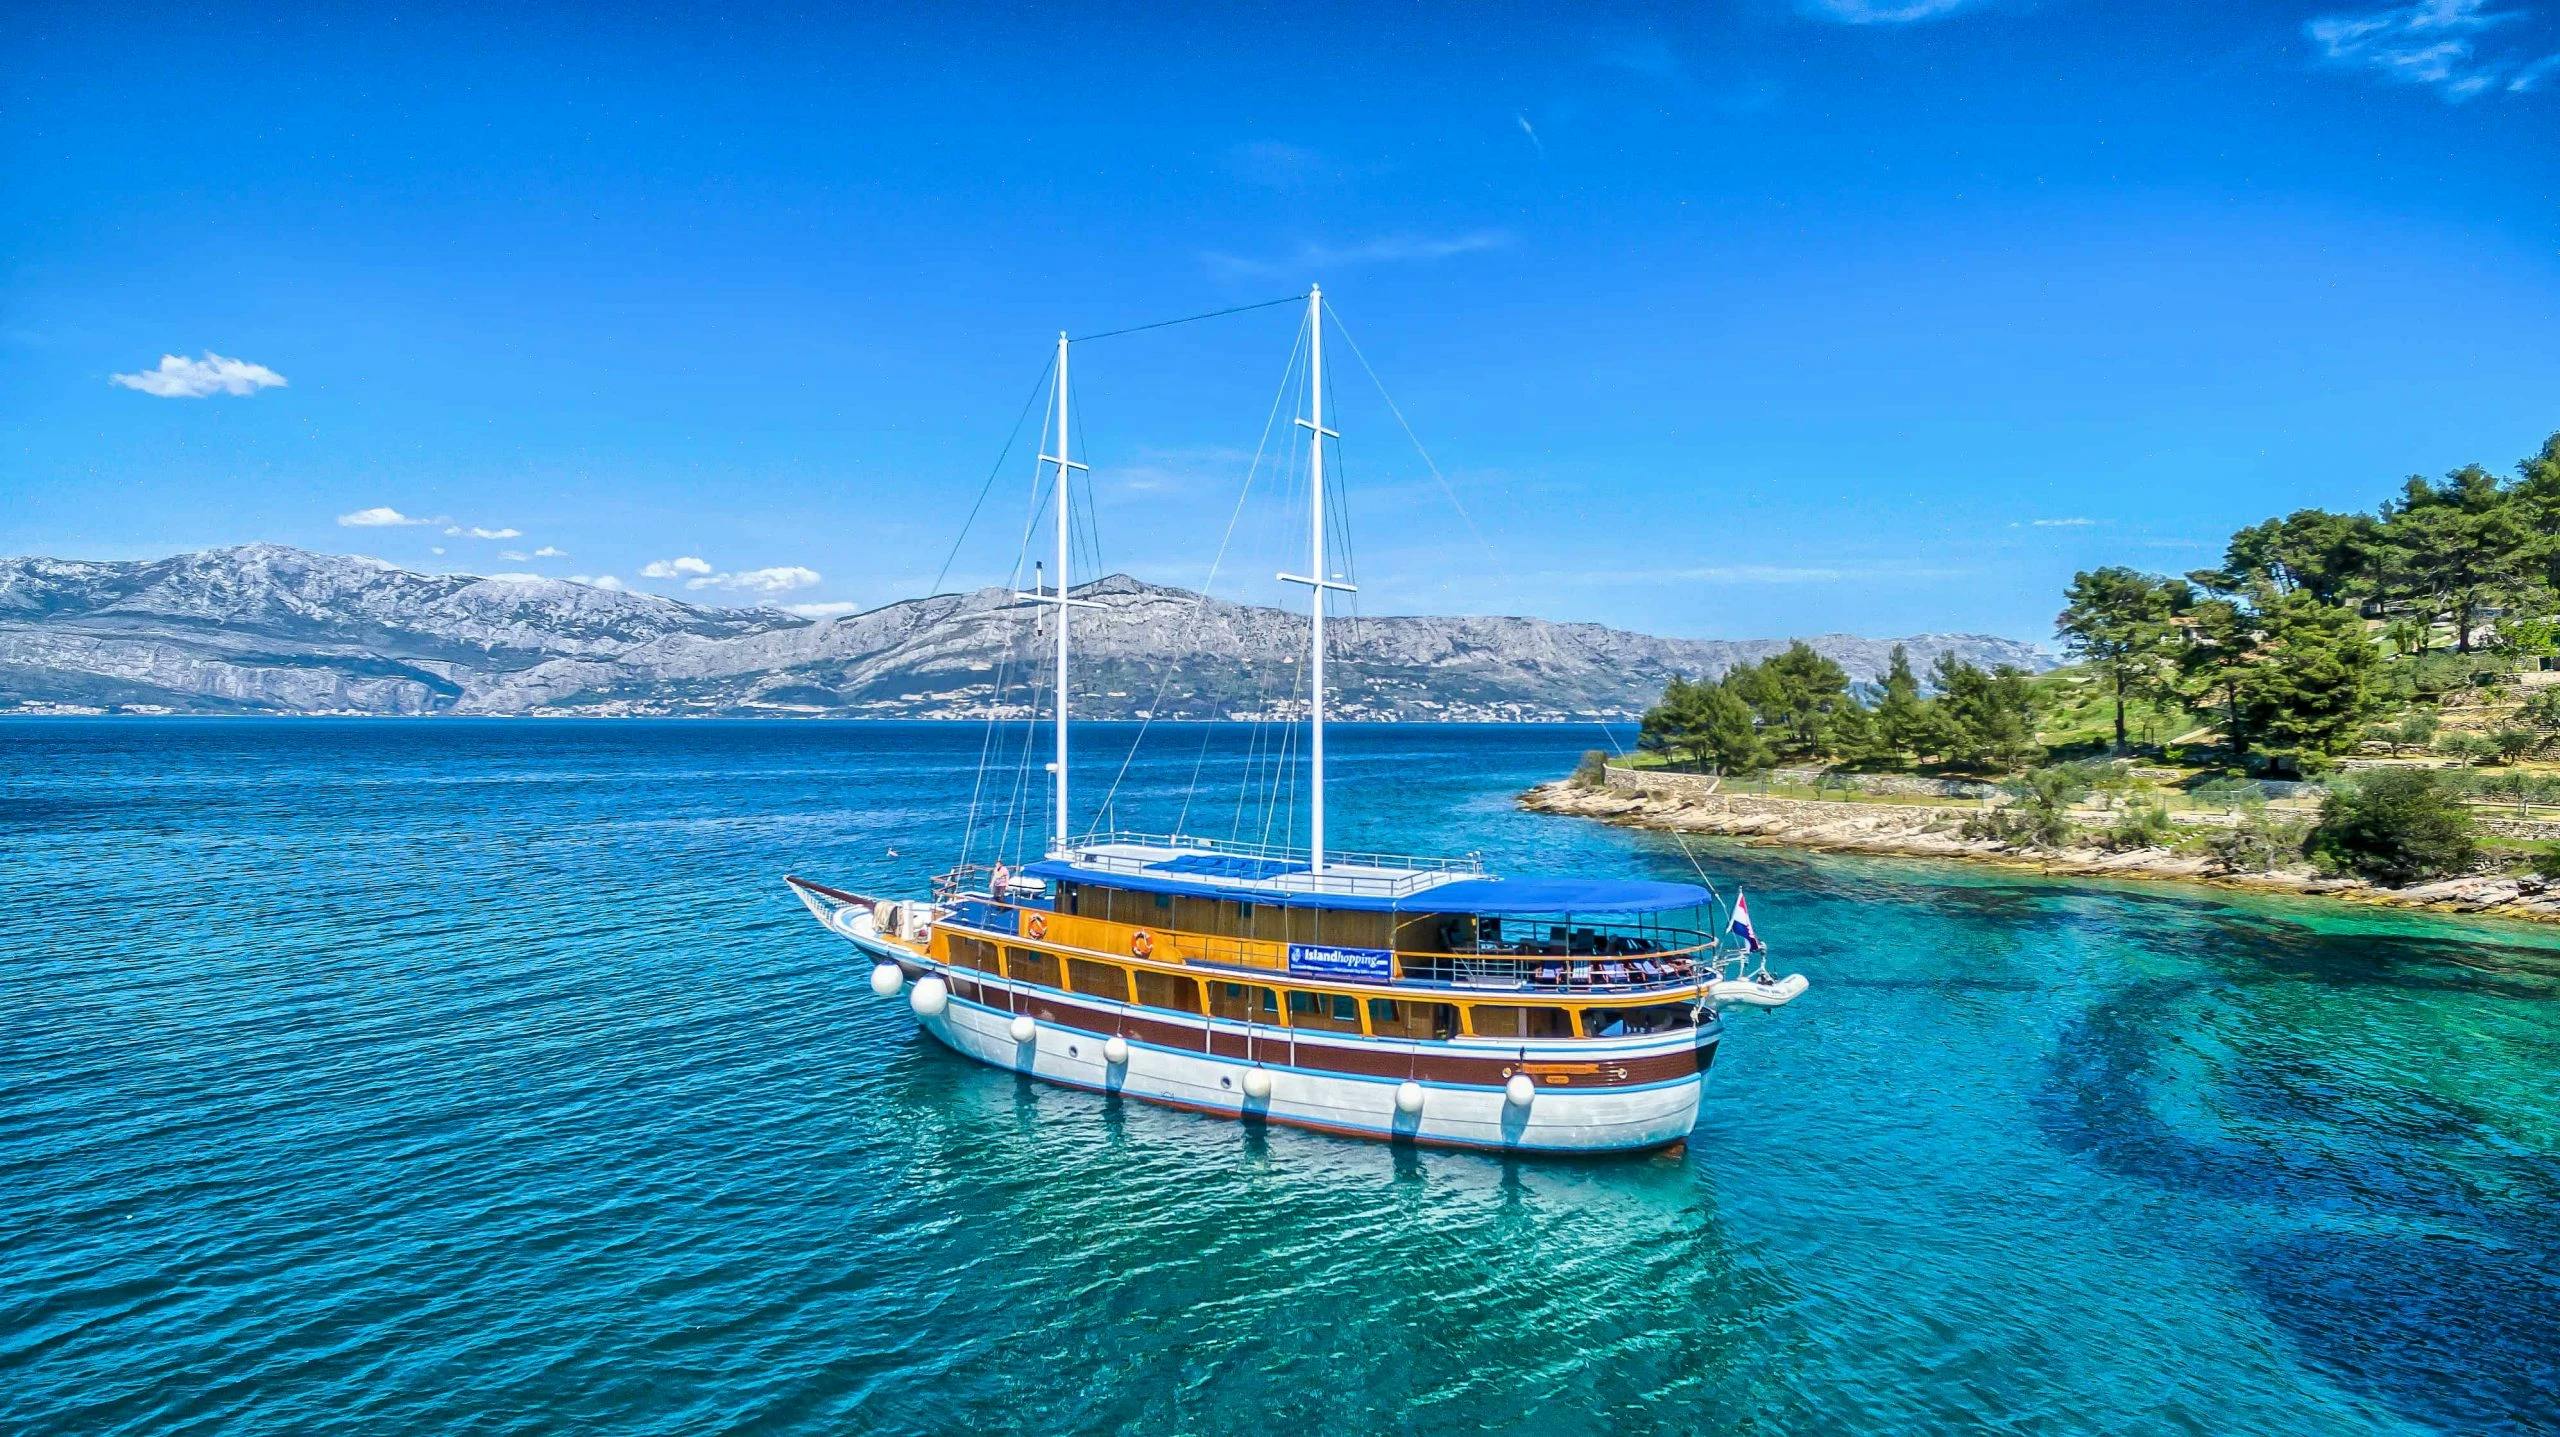 on-bike-and-boat-premium-among-the-islands-of-southern-dalmatia